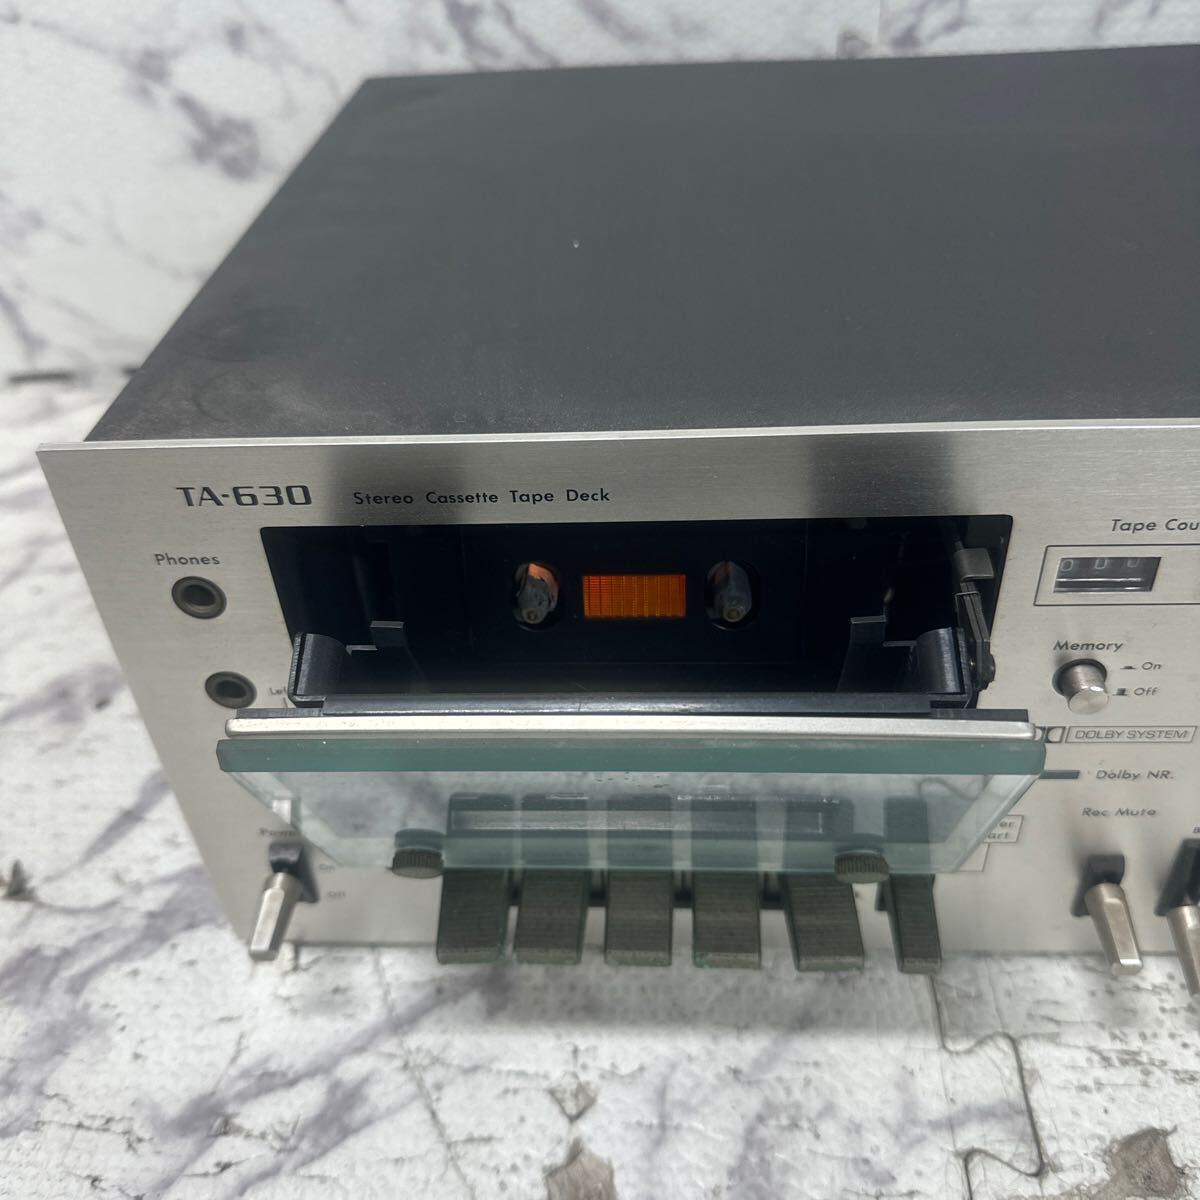 MYM5-193 super-discount ONKYO Stereo Cassette Tape Deck TA-630 cassette deck electrification OK used present condition goods *3 times re-exhibition . liquidation 